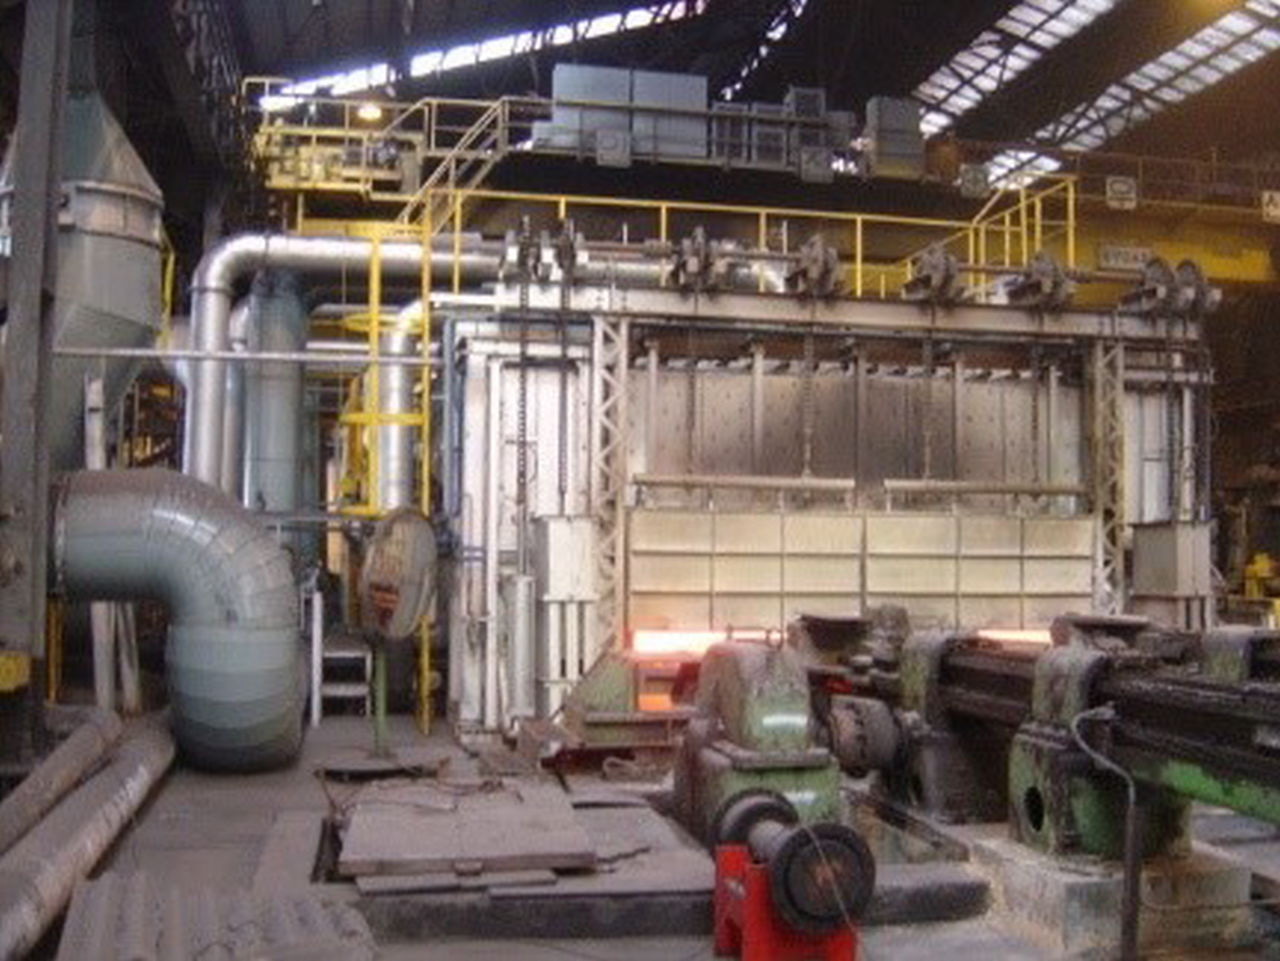  SEAH Changwon Large Rolling Mill (2006)